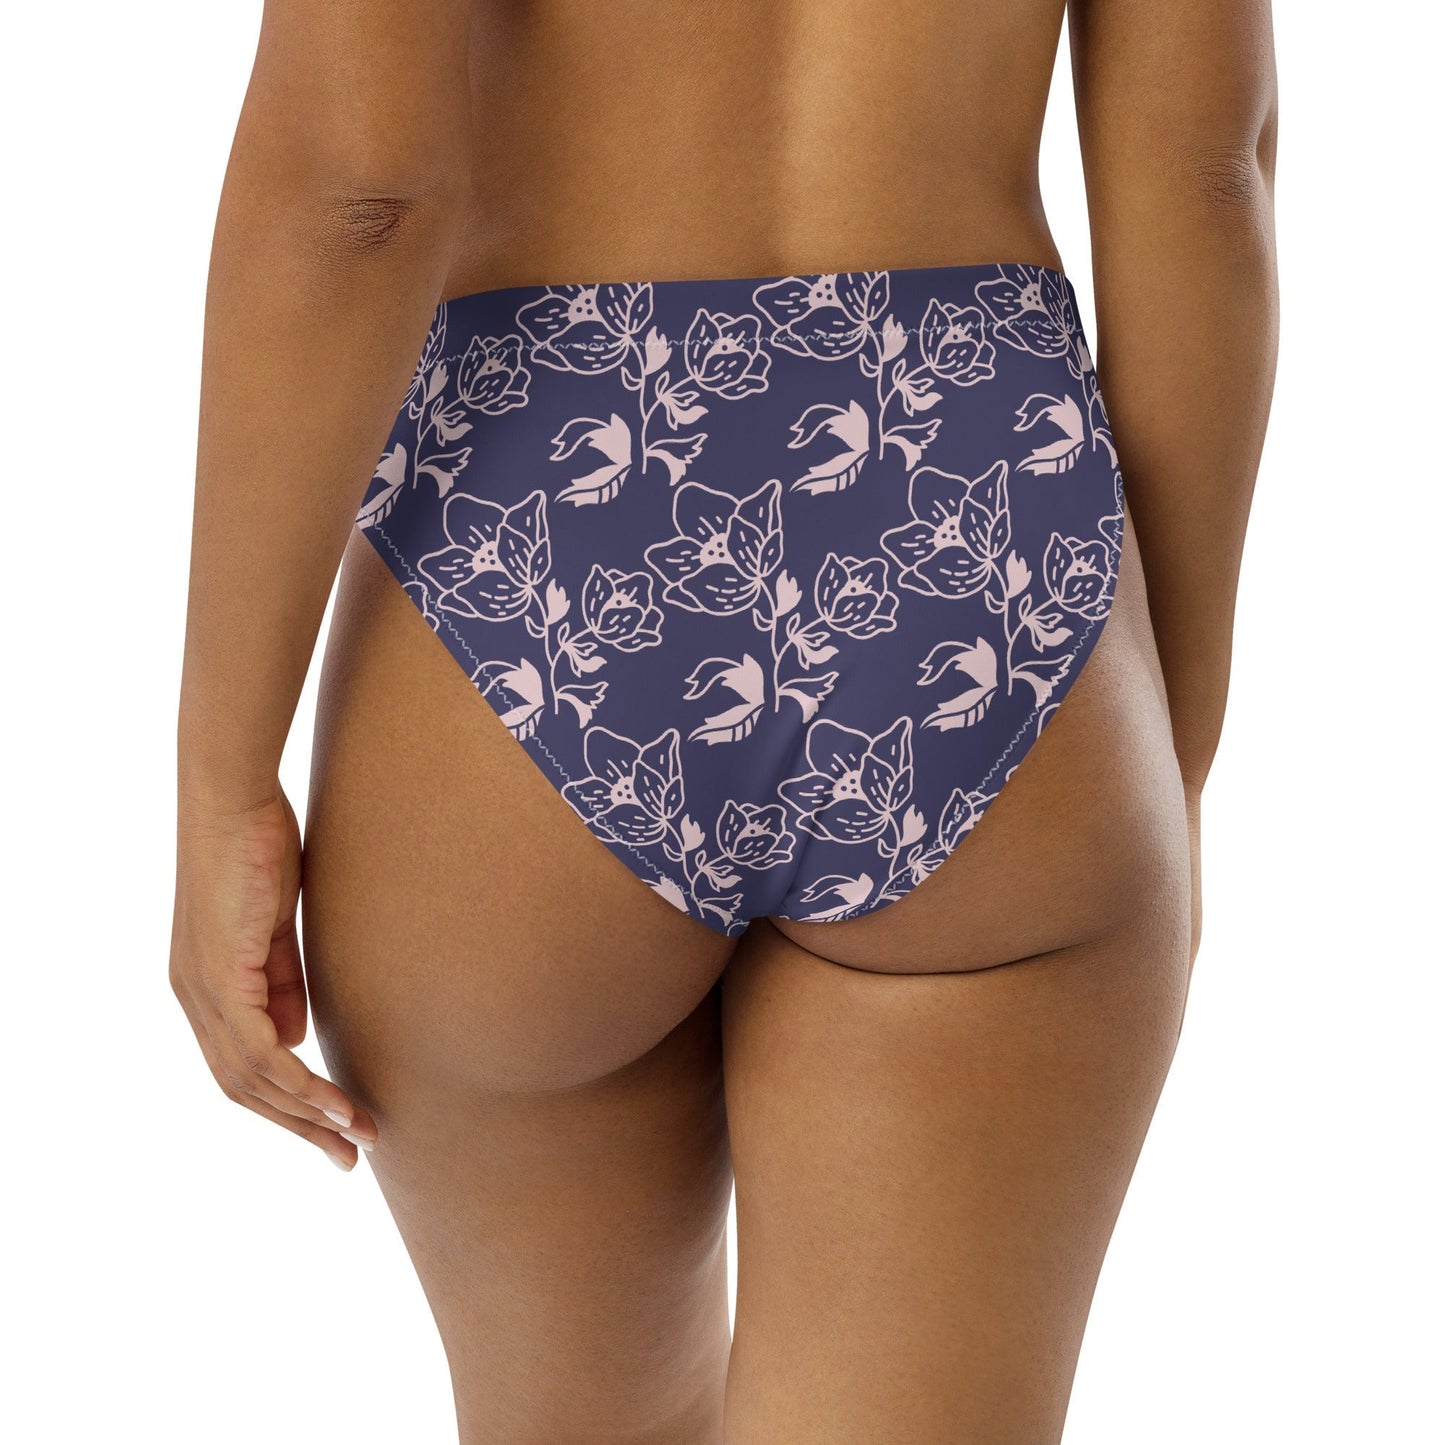 REALM | In Bloom Recycled high-waisted bikini bottom - Realm Concept Market